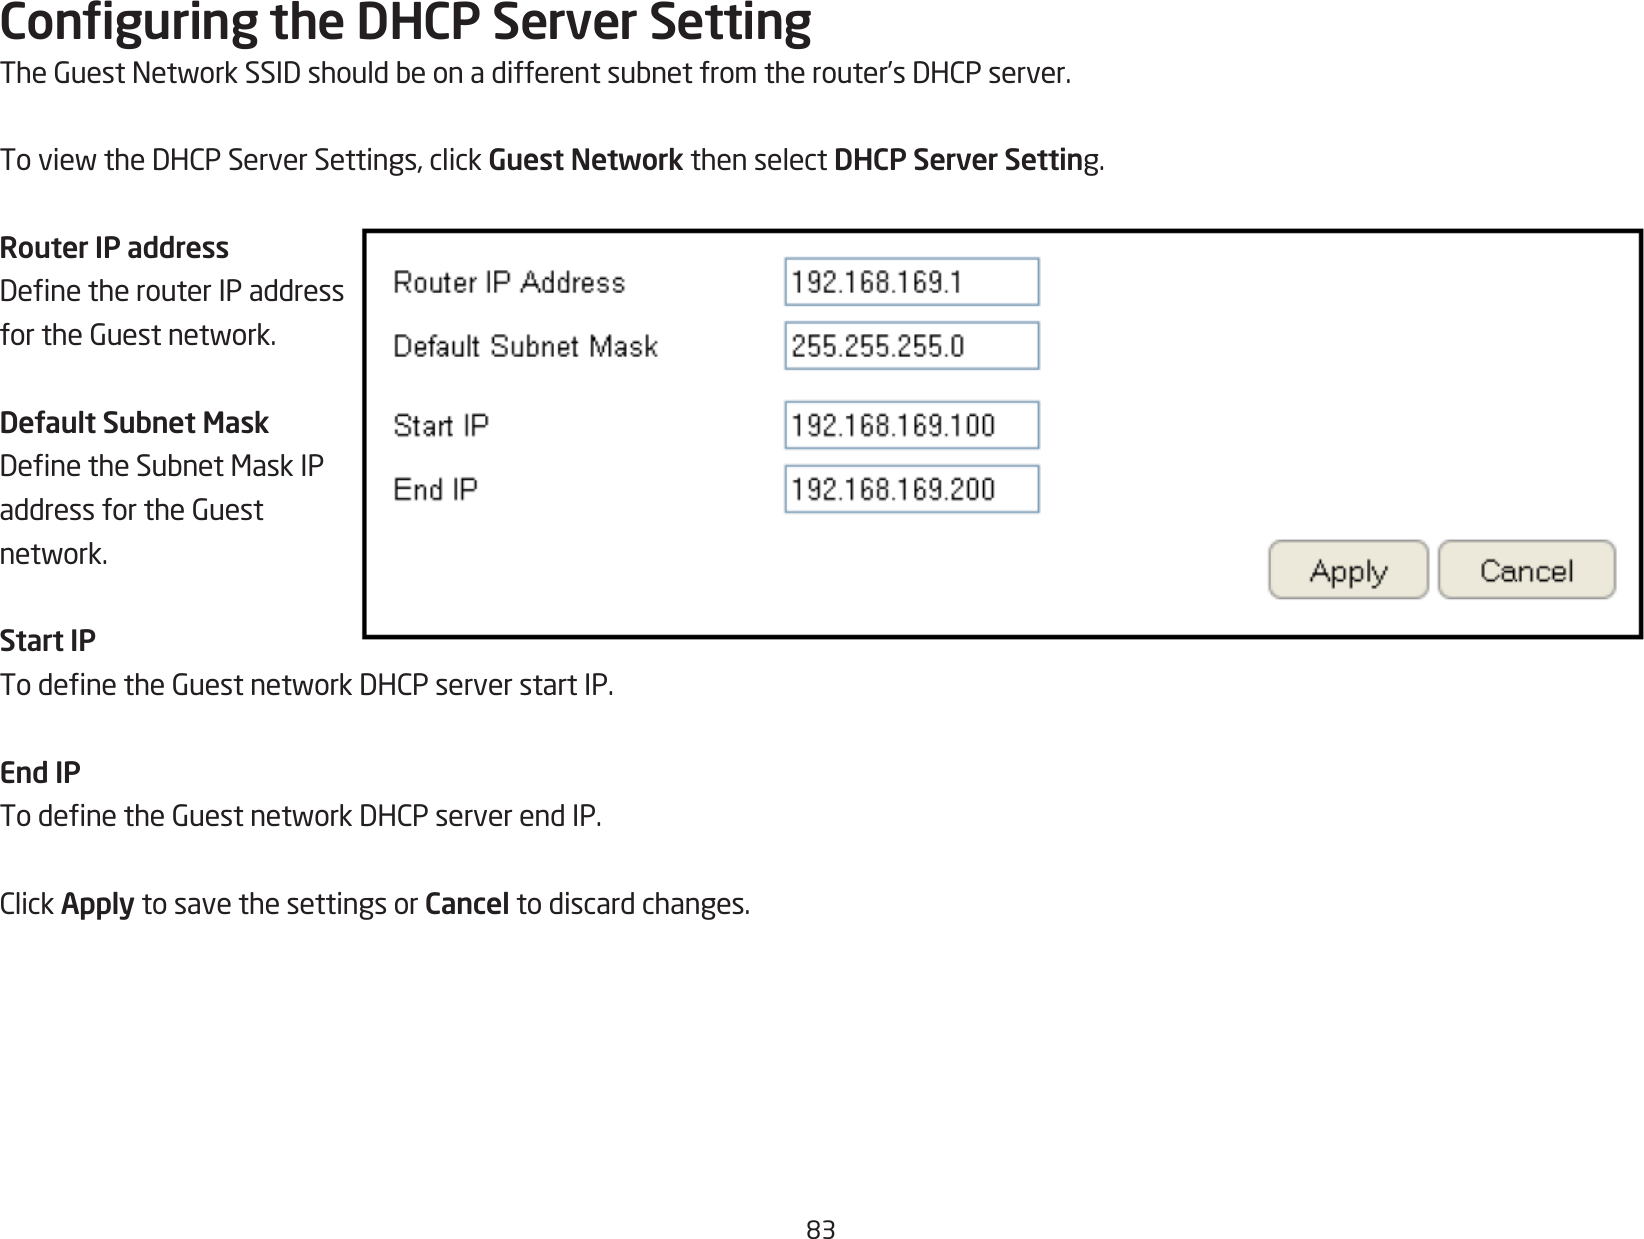 83Conguring the DHCP Server SettingTheGuestNetworkSSIDshouldbeonadifferentsubnetfromtherouter’sDHCPserver.ToviewtheDHCPServerSettings,clickGuest Network then select DHCP Server Setting.Router IP addressDenetherouterIPaddressfortheGuestnetwork.Default Subnet MaskDenetheSubnetMaskIPaddressfortheGuestnetwork.Start IPTodenetheGuestnetworkDHCPserverstartIP.End IPTodenetheGuestnetworkDHCPserverendIP.ClickApply to save the settings or Cancel to discard changes.